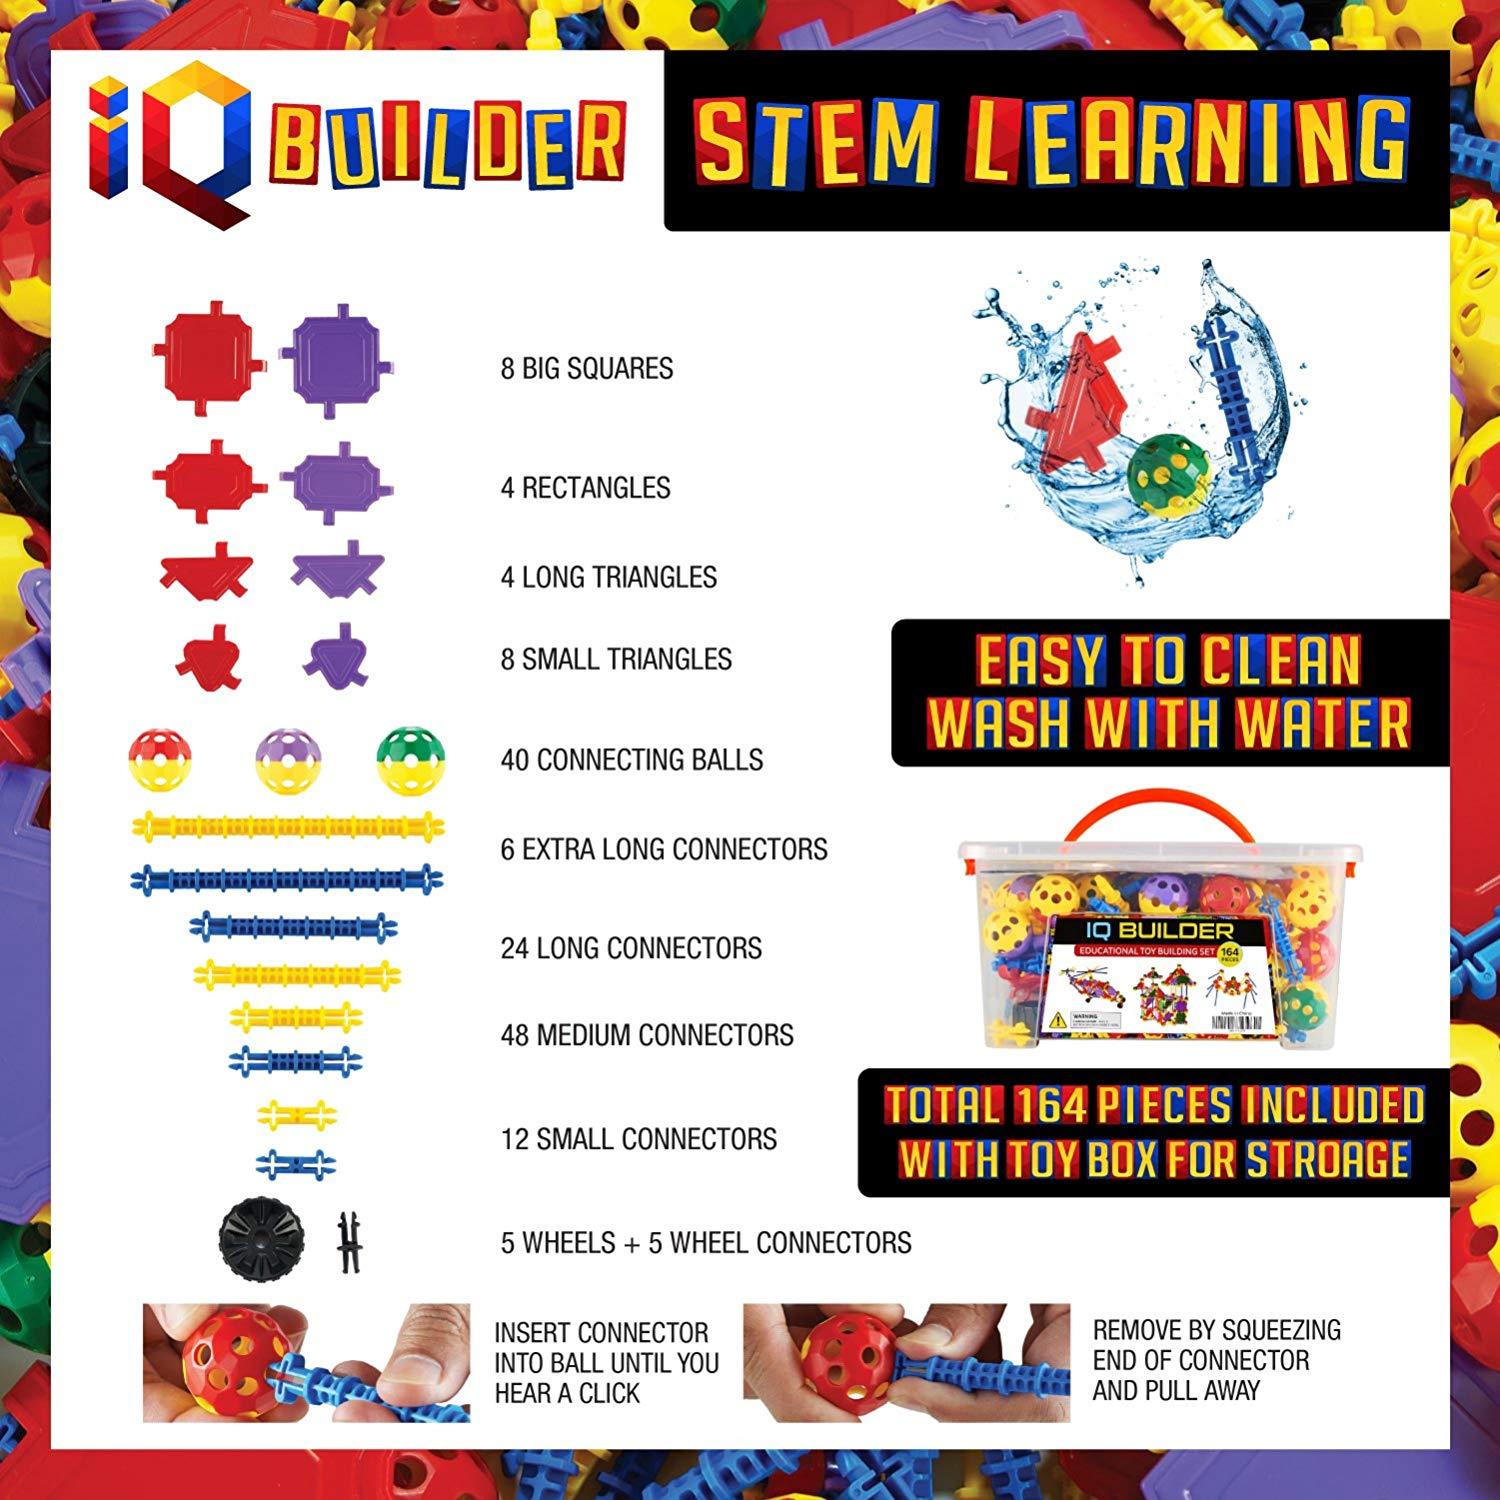 IQ BUILDER STEM Learning Toys, Creative Construction Engineering, Fun Educational Building Blocks Toy Set for Boys and Girls Ages - 5, 6, 7, 8, 9 and 10 Year Old, Best Toy Gift for Kids - image 5 of 8